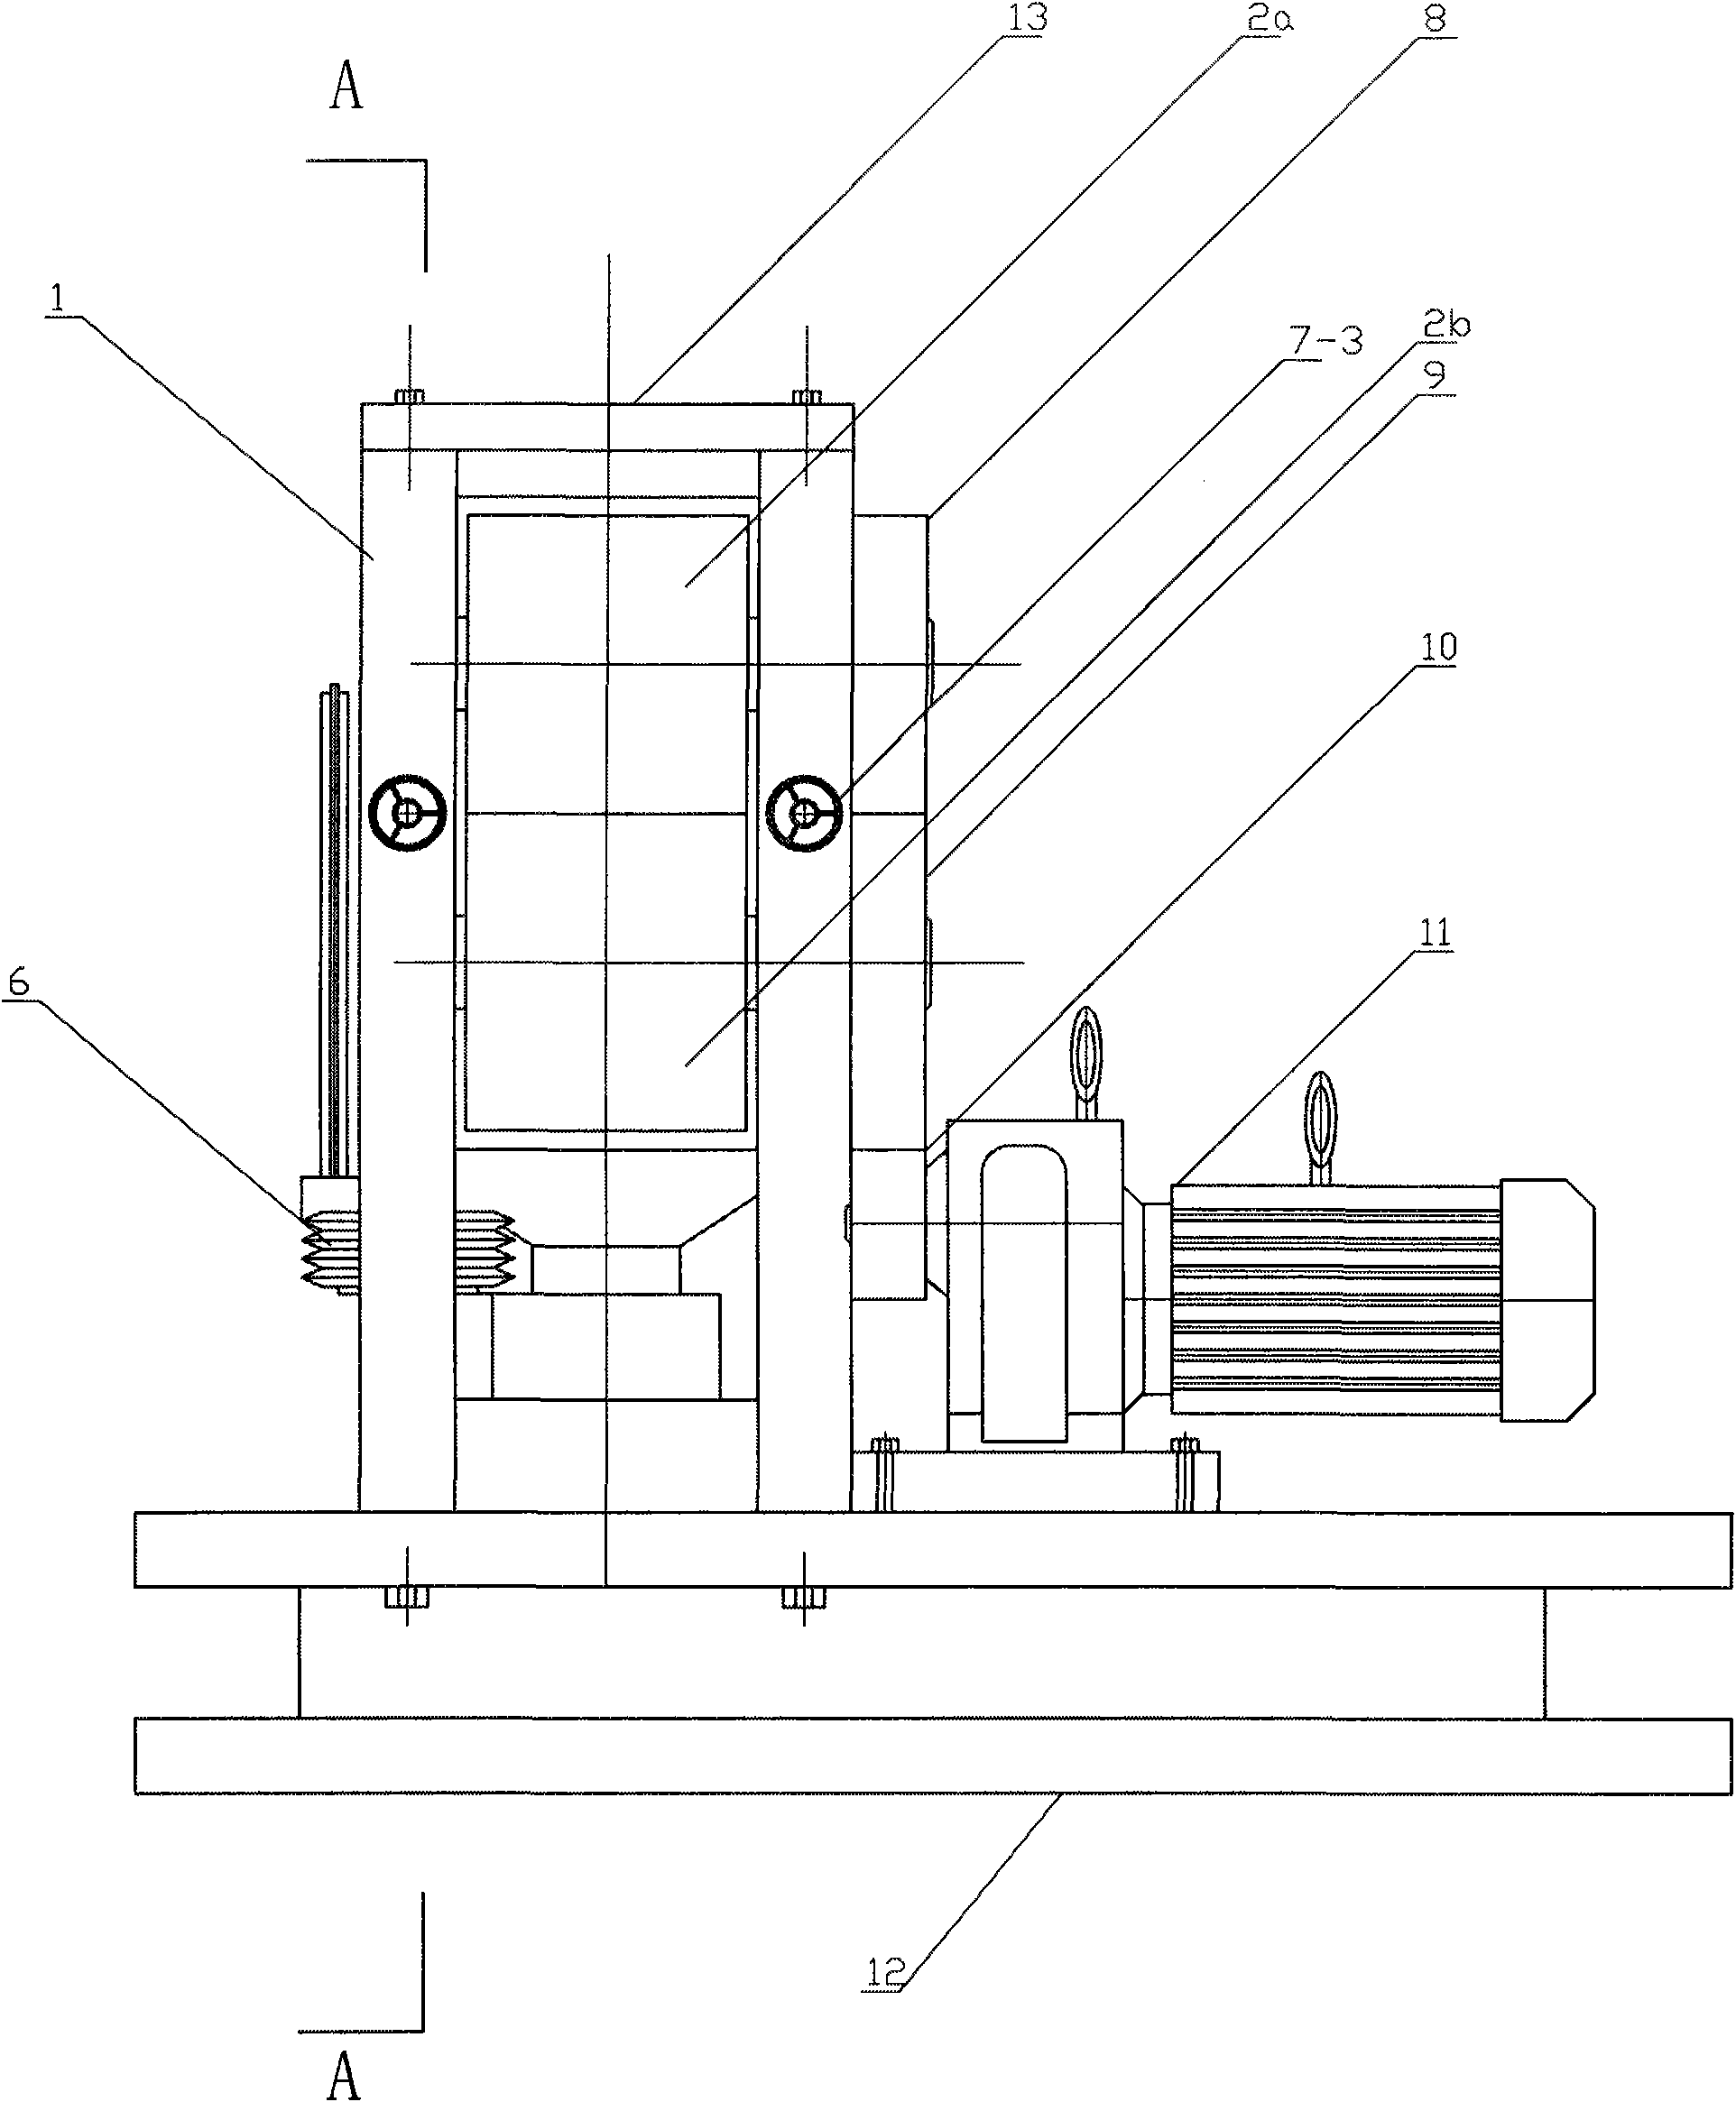 Single-point supporting film rolling mill capable of displaying roller gap